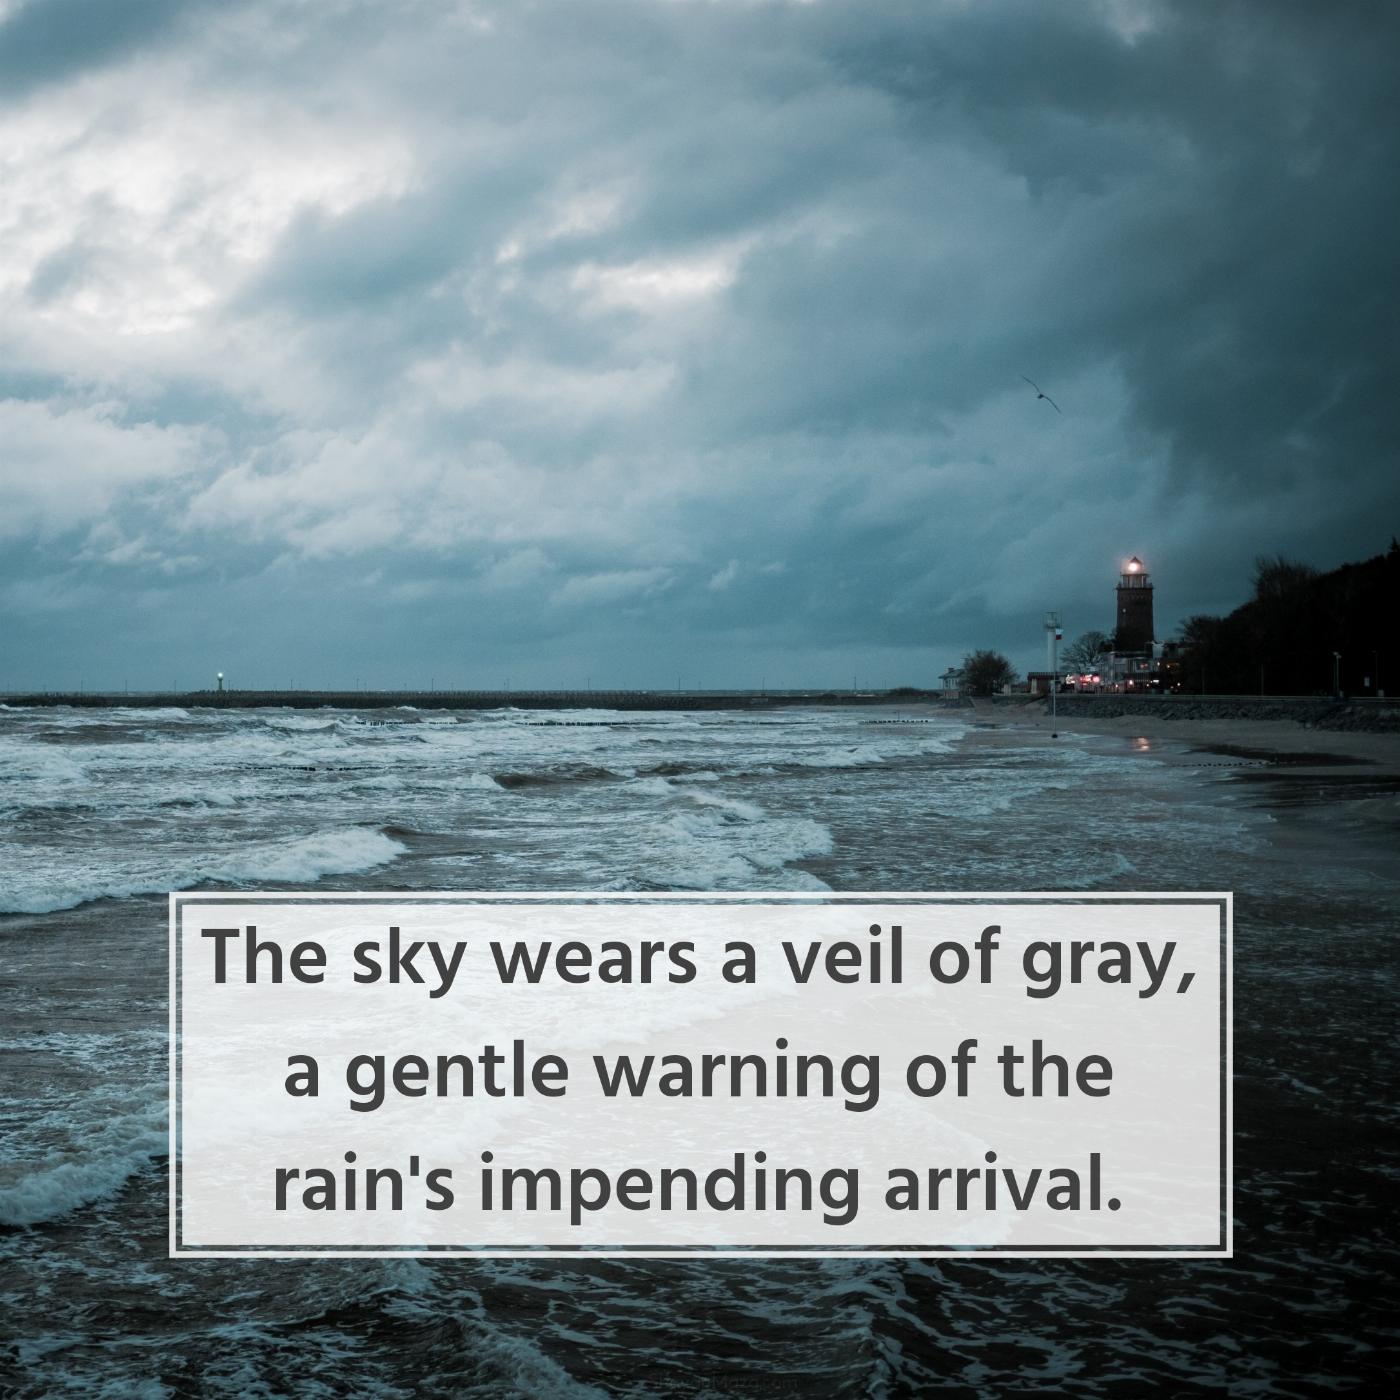 The sky wears a veil of gray a gentle warning of the rain